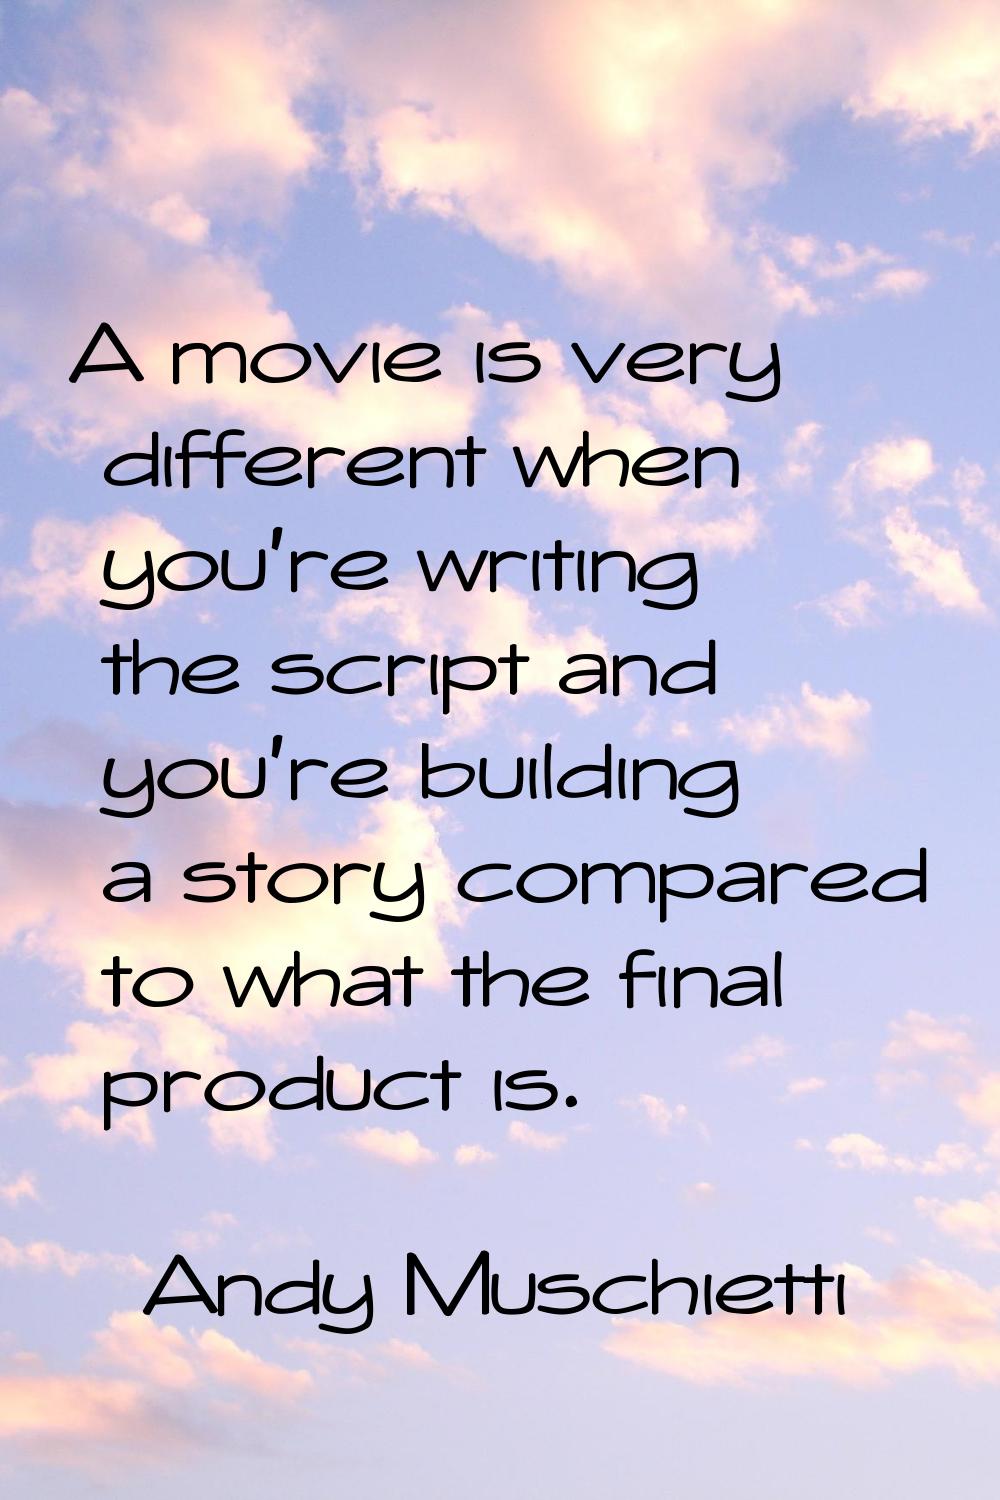 A movie is very different when you're writing the script and you're building a story compared to wh